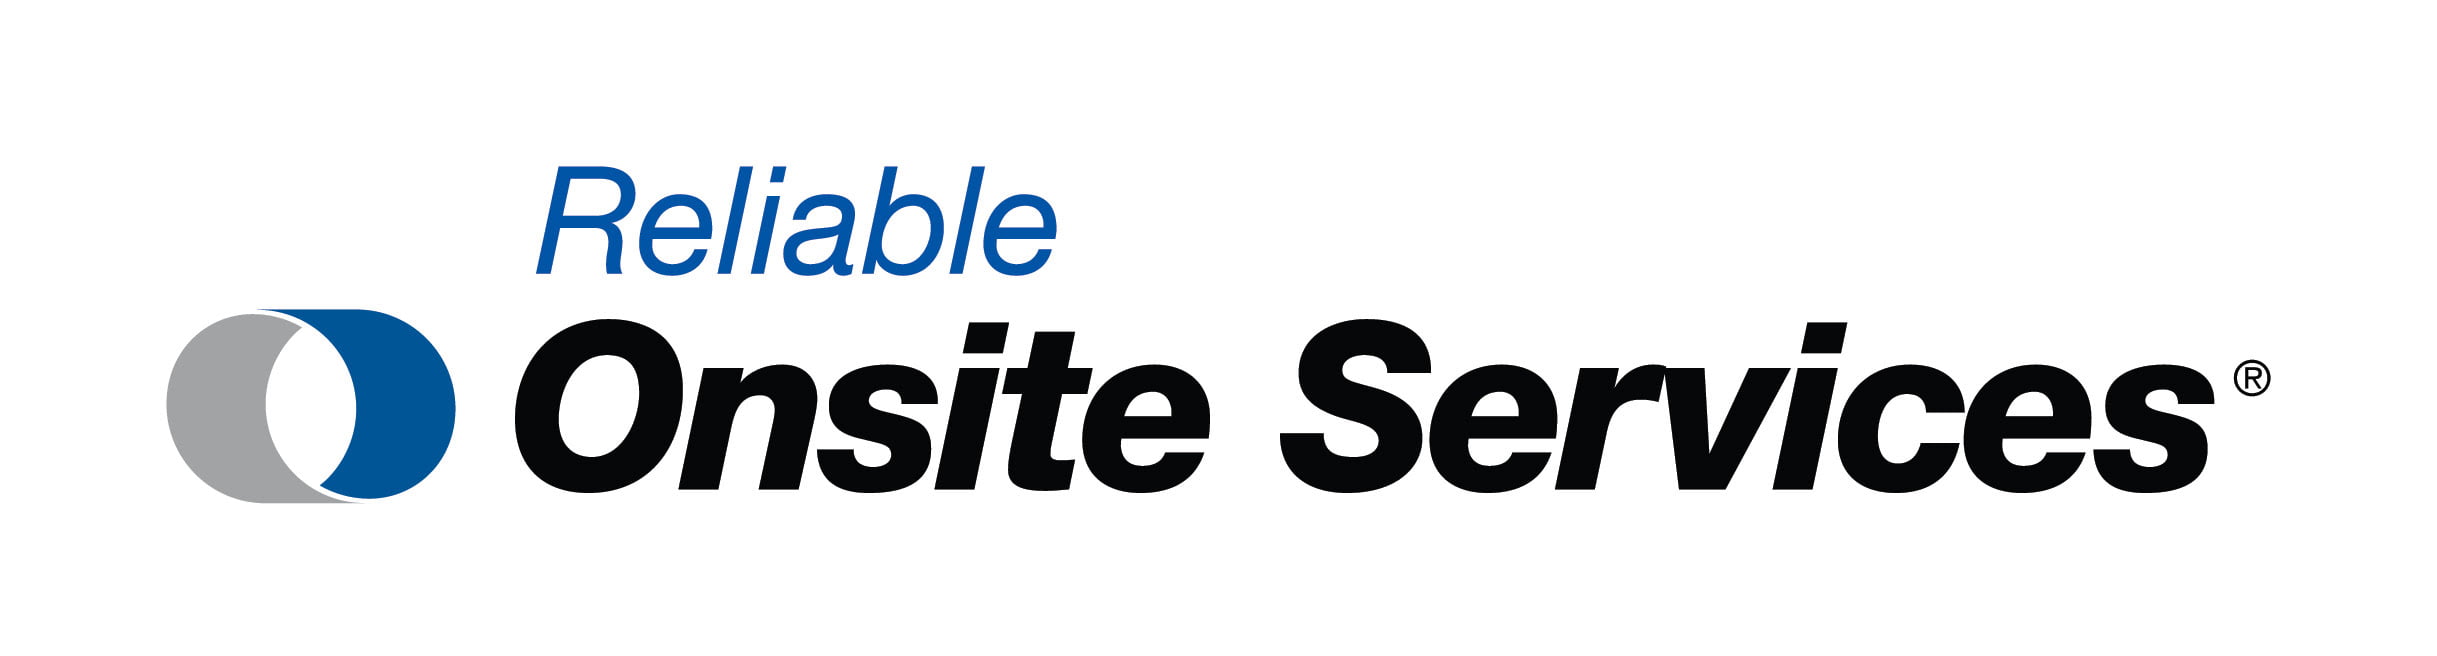 Onsite Reliable Services